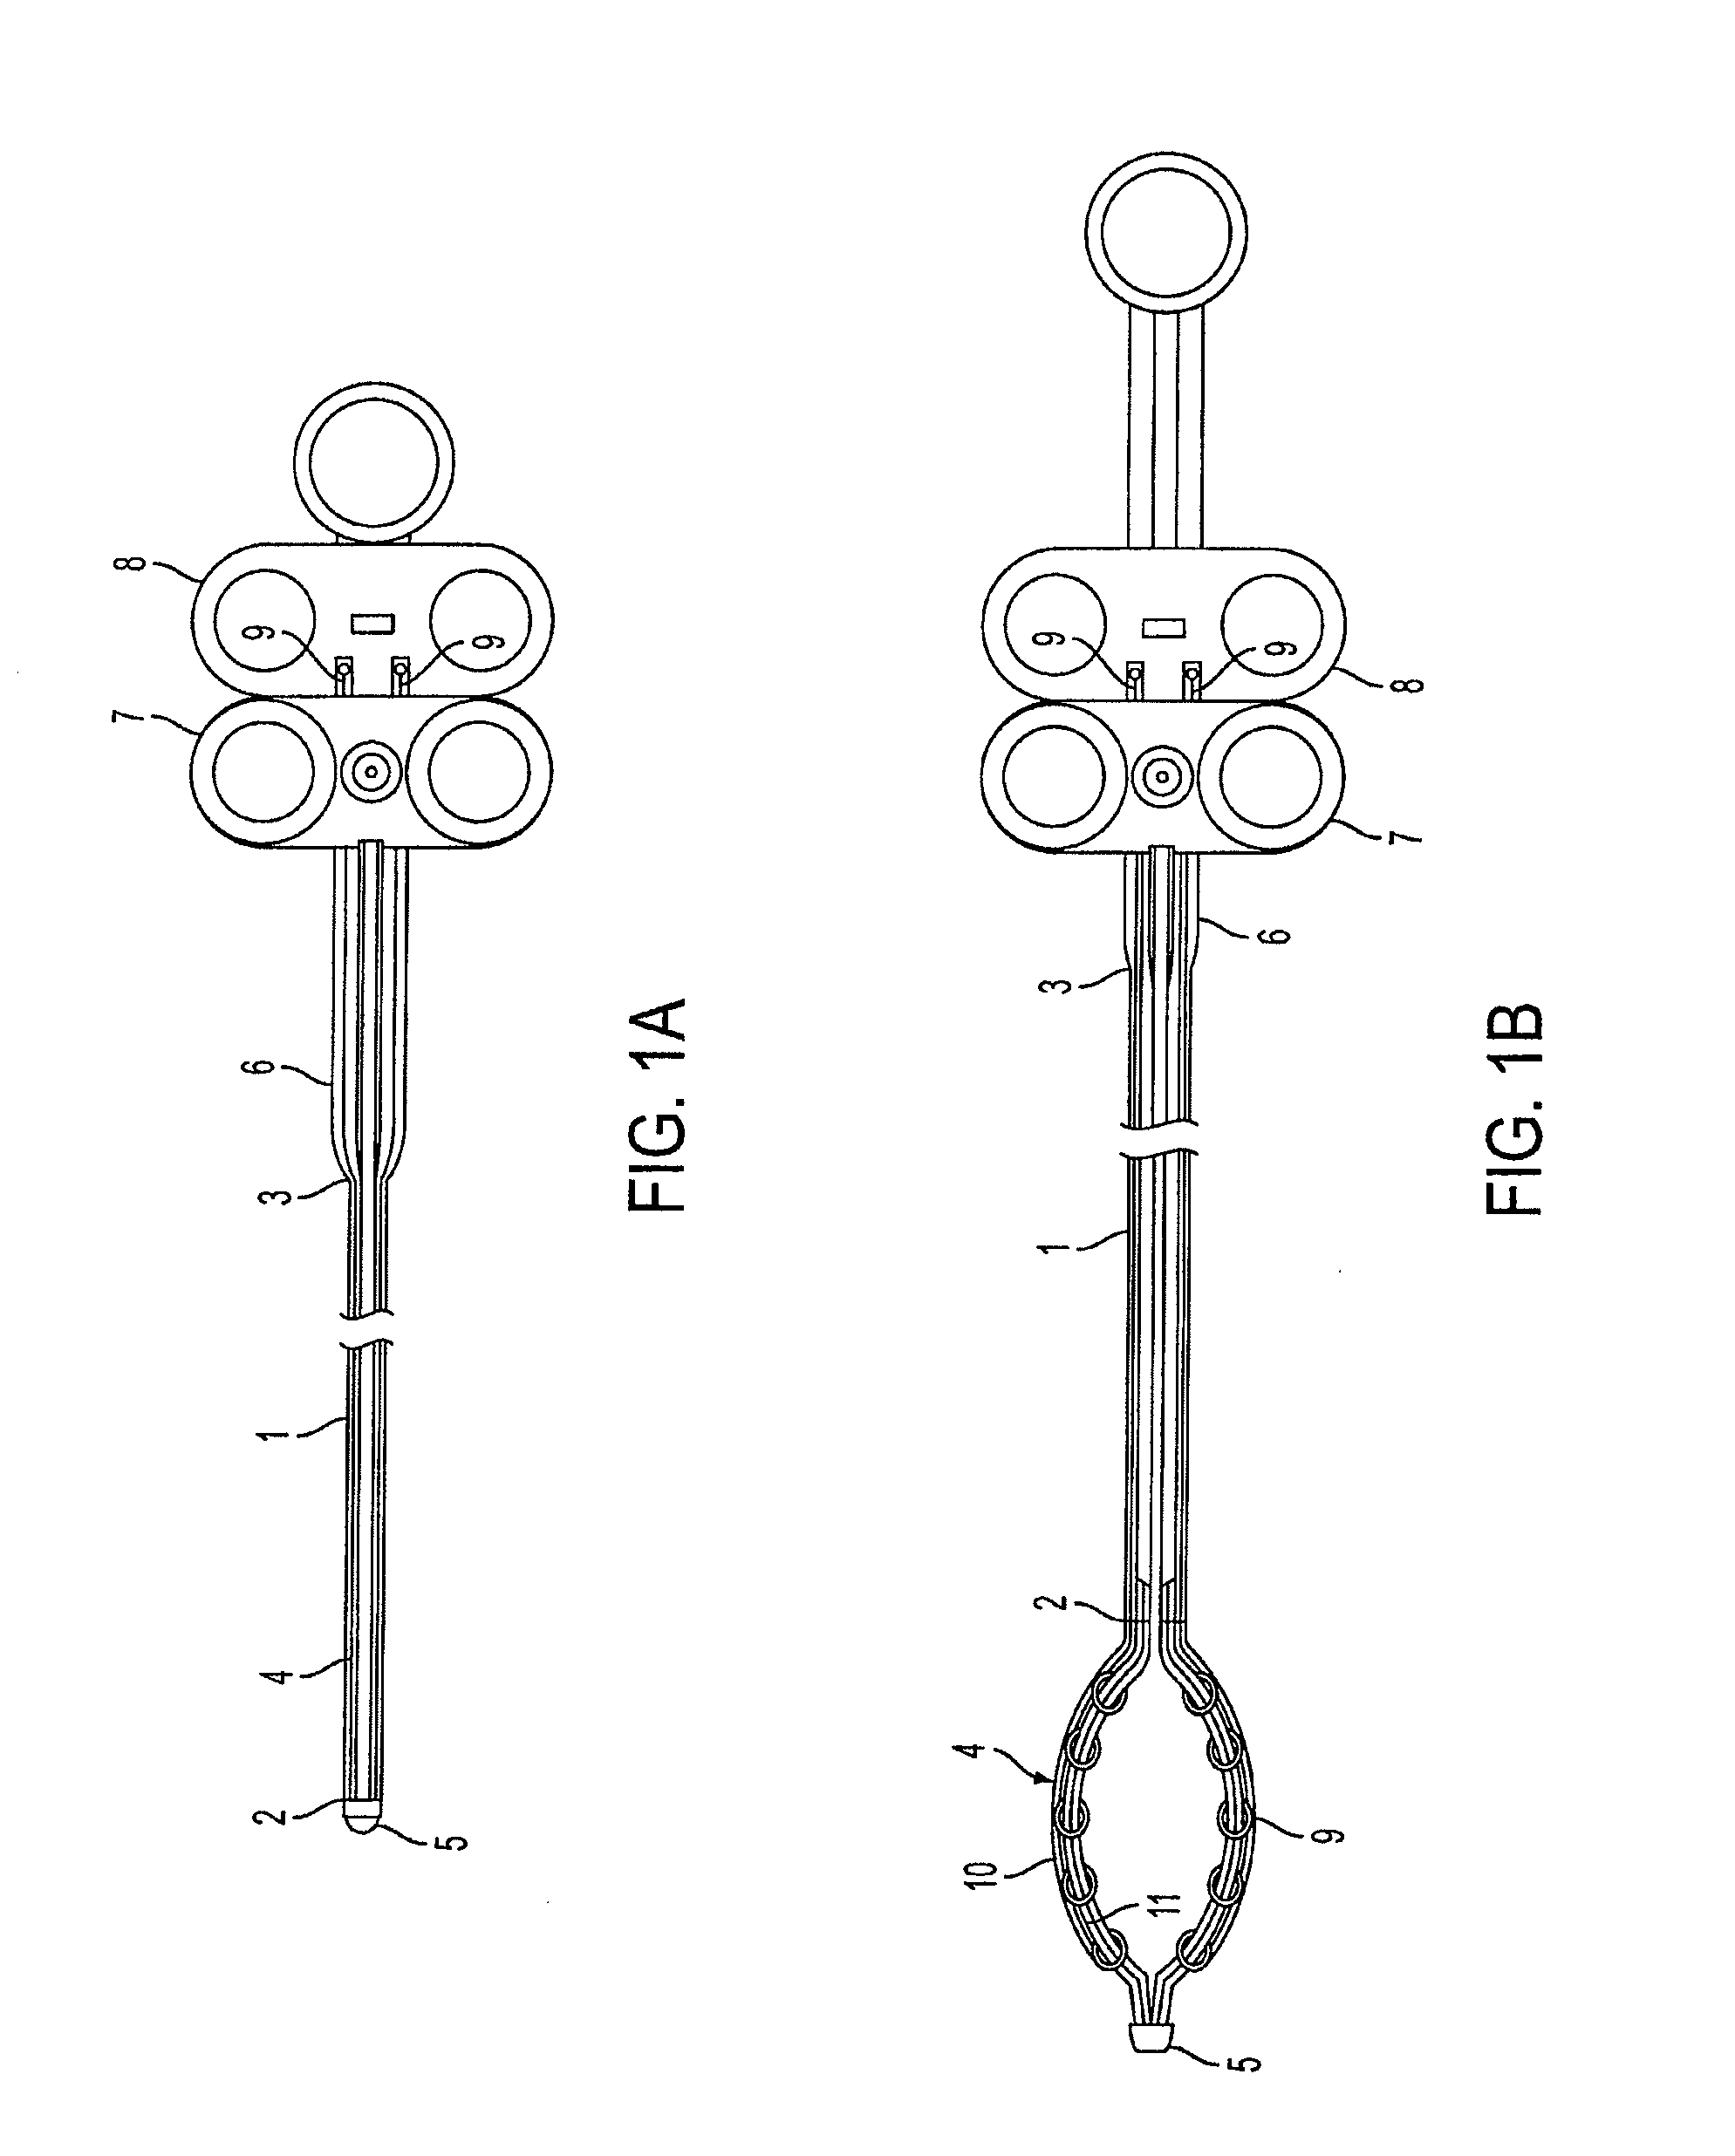 Two-stage snare-basket medical device